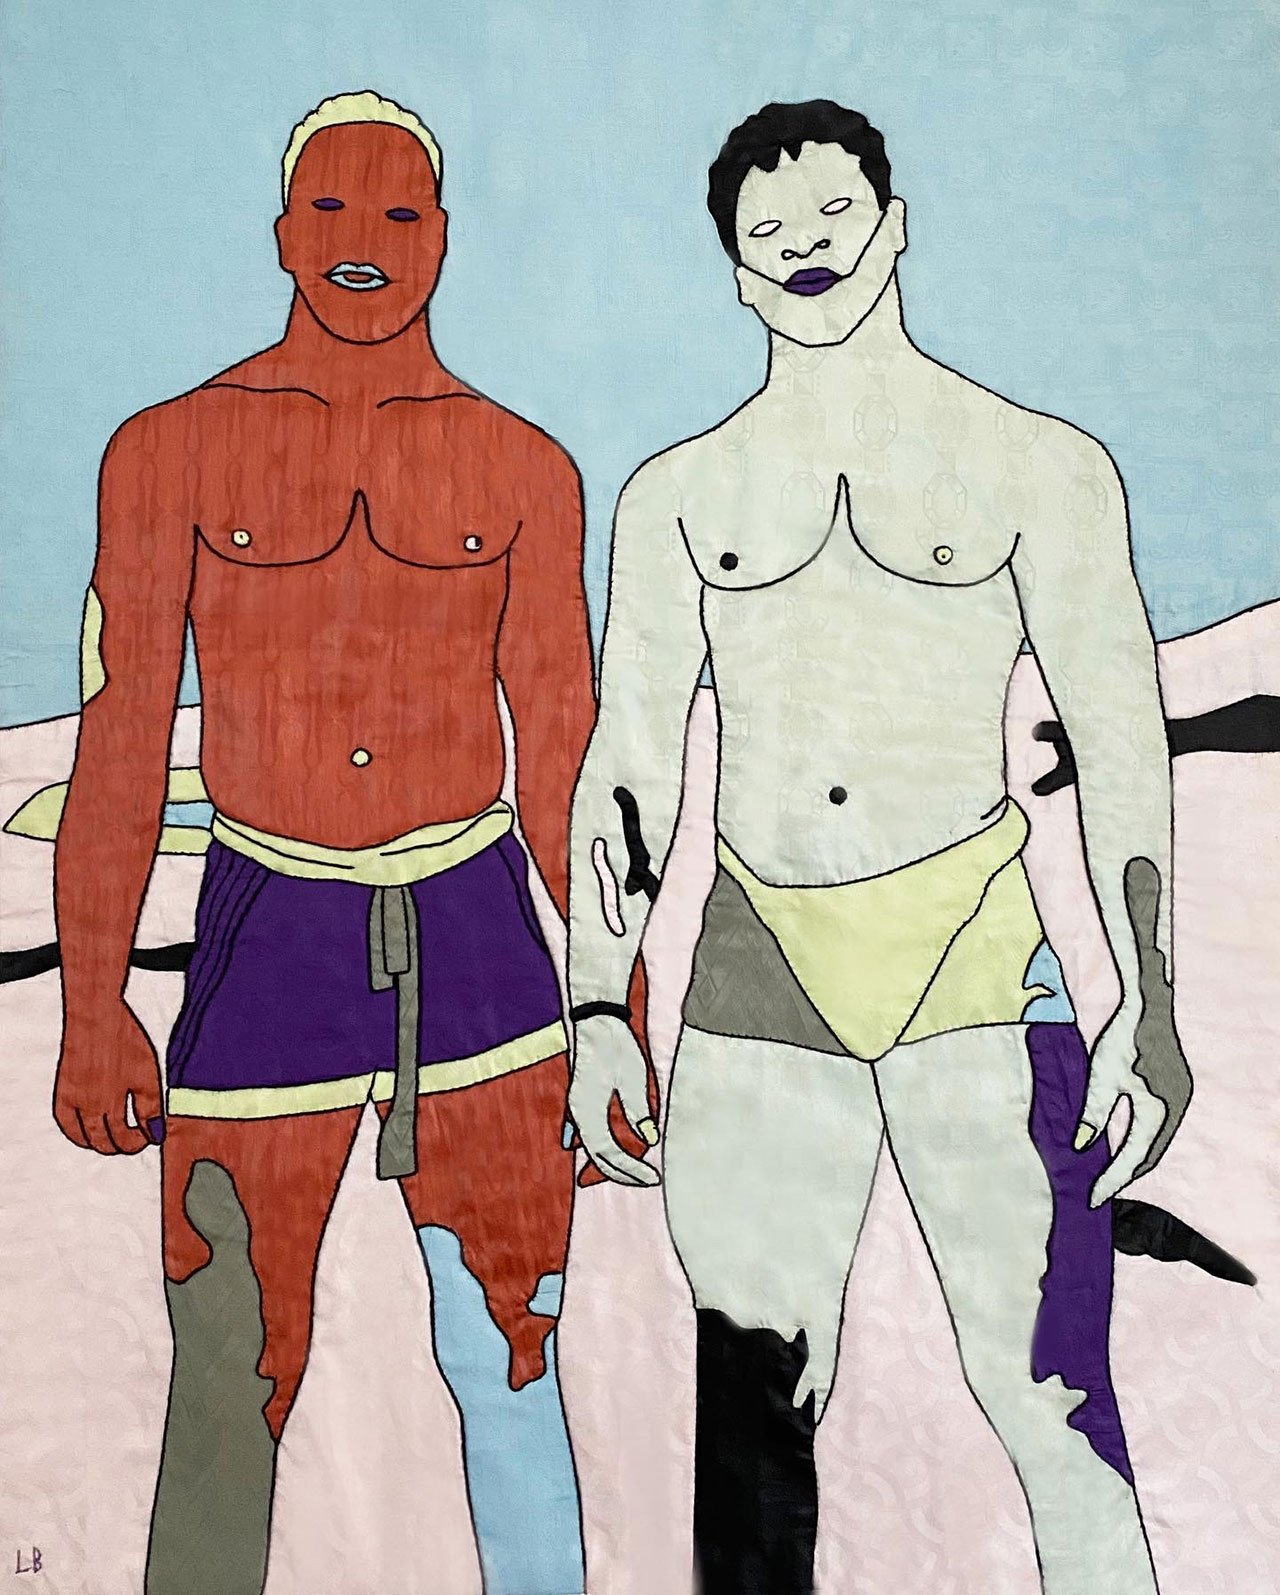 Louis Barthélemy, KHAYAMIYA 11 - TWO BROTHERS from the Lutteurs/Wrestlers series, 2021. Appliquéd and hand embroidered «bazins» on cotton canvas. Unique edition.